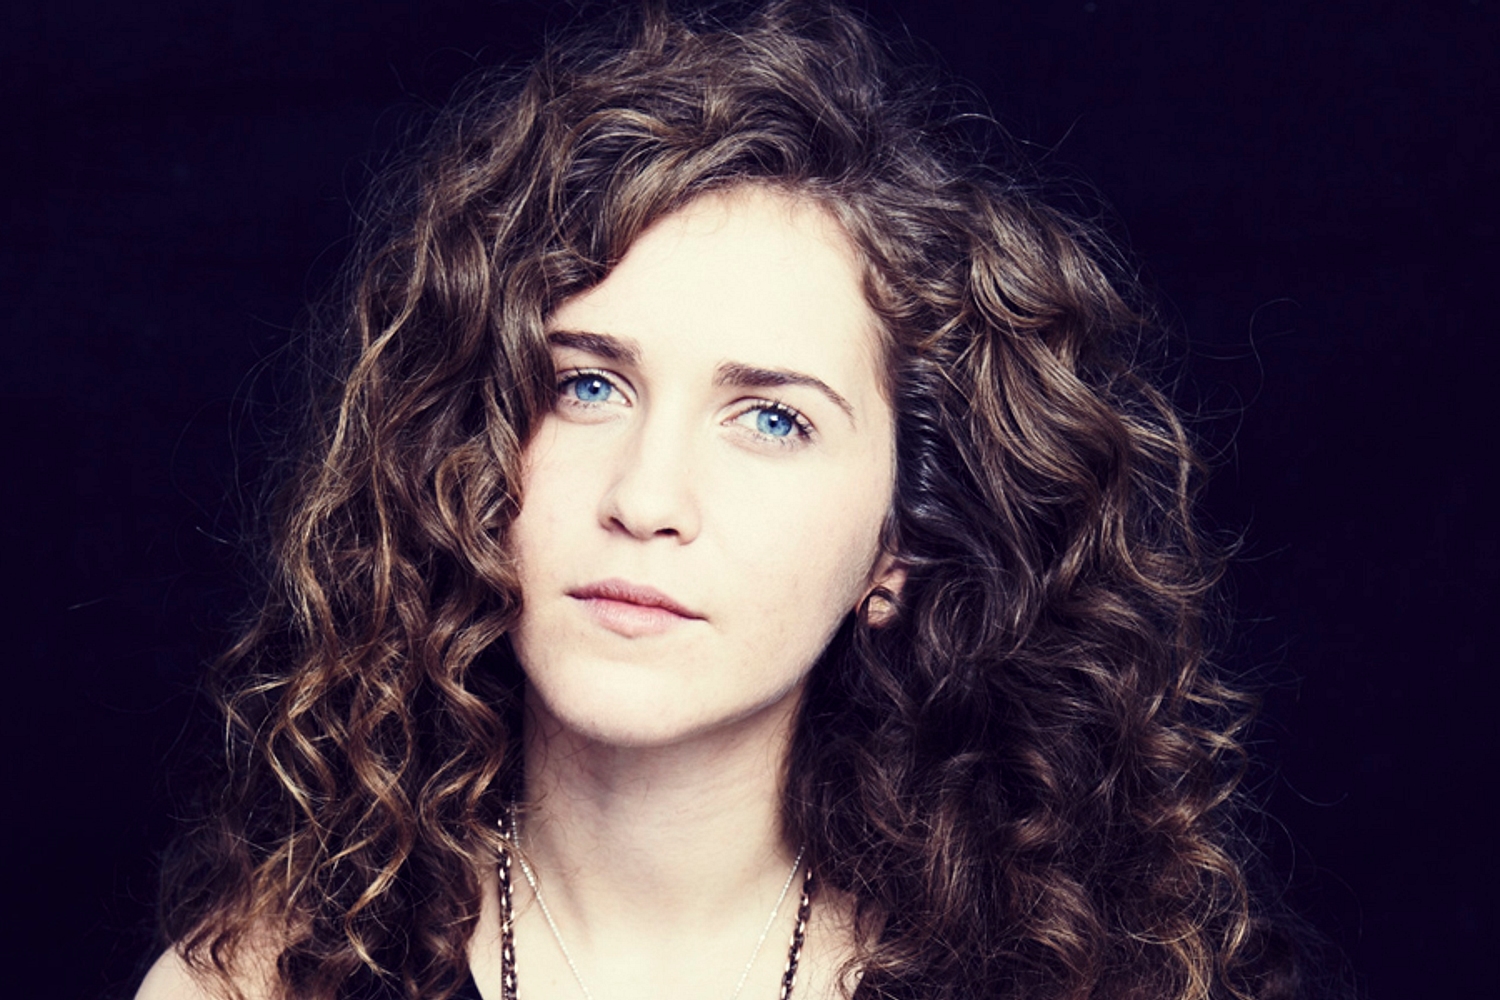 Rae Morris: "This is me, this is who I am"